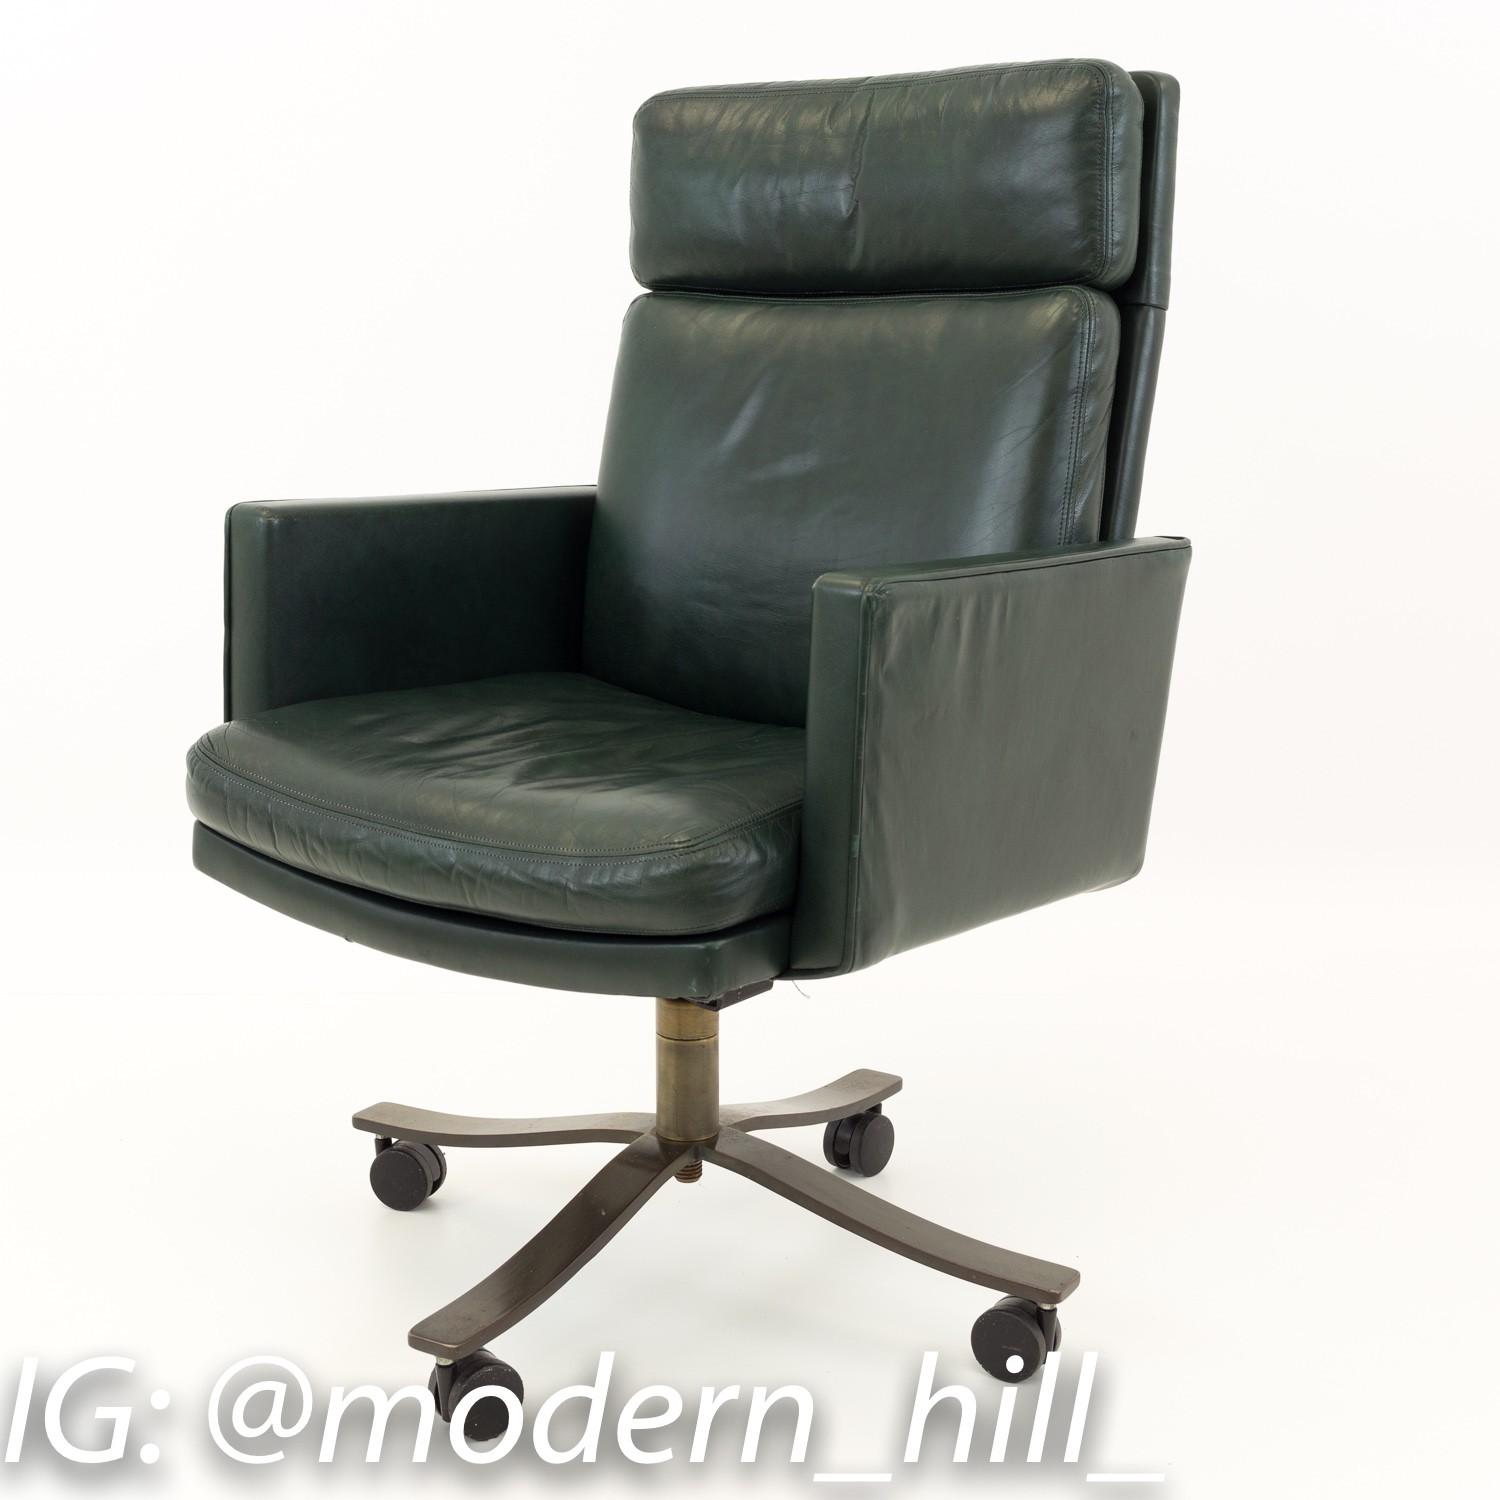 Stow and Davis Mid Century Green Office Desk Chair